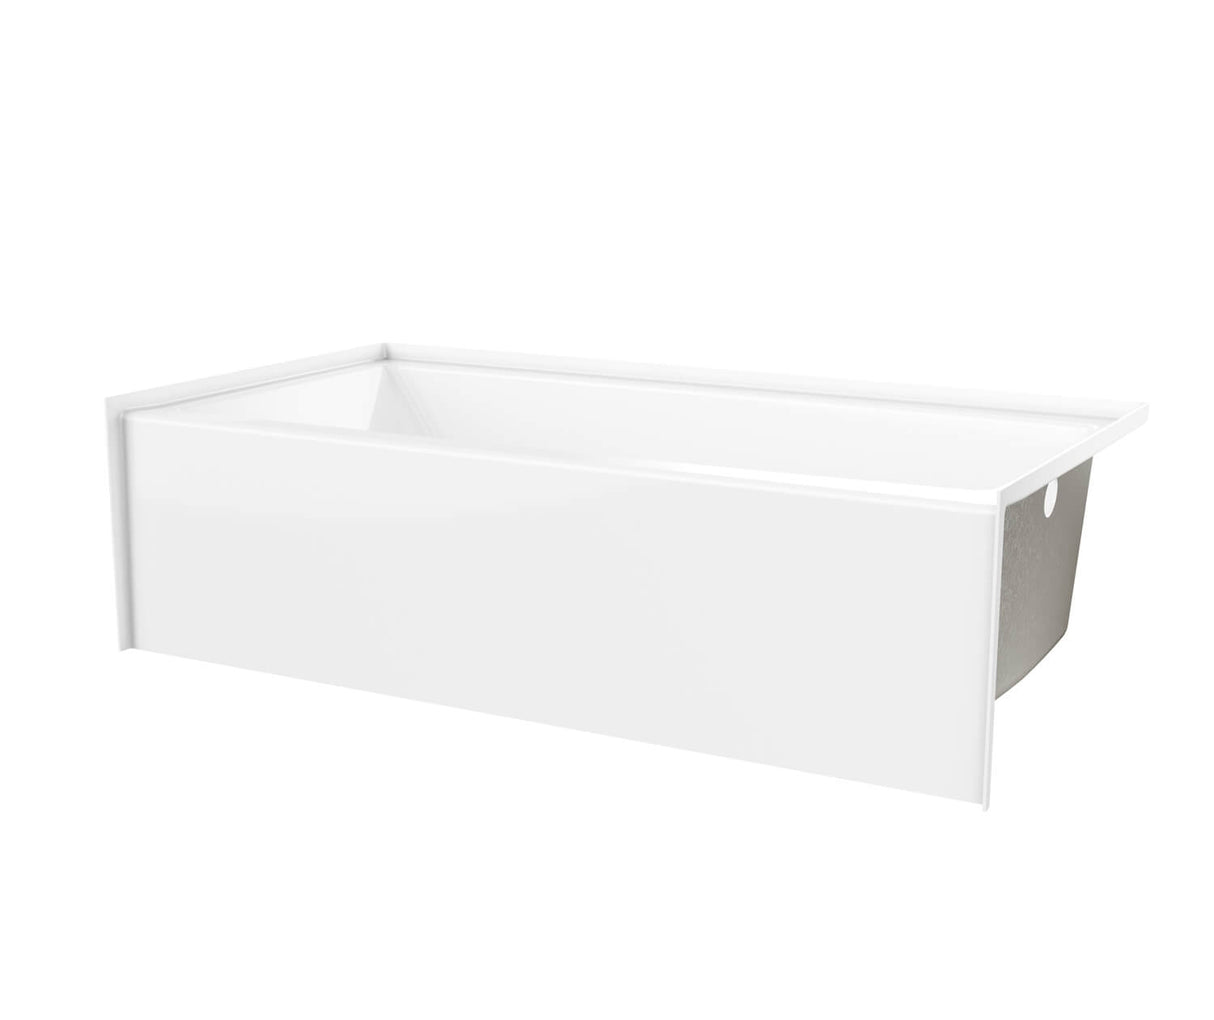 Aker SMIN-3060 AFR AcrylX Alcove Left-Hand Drain Bath in Biscuit